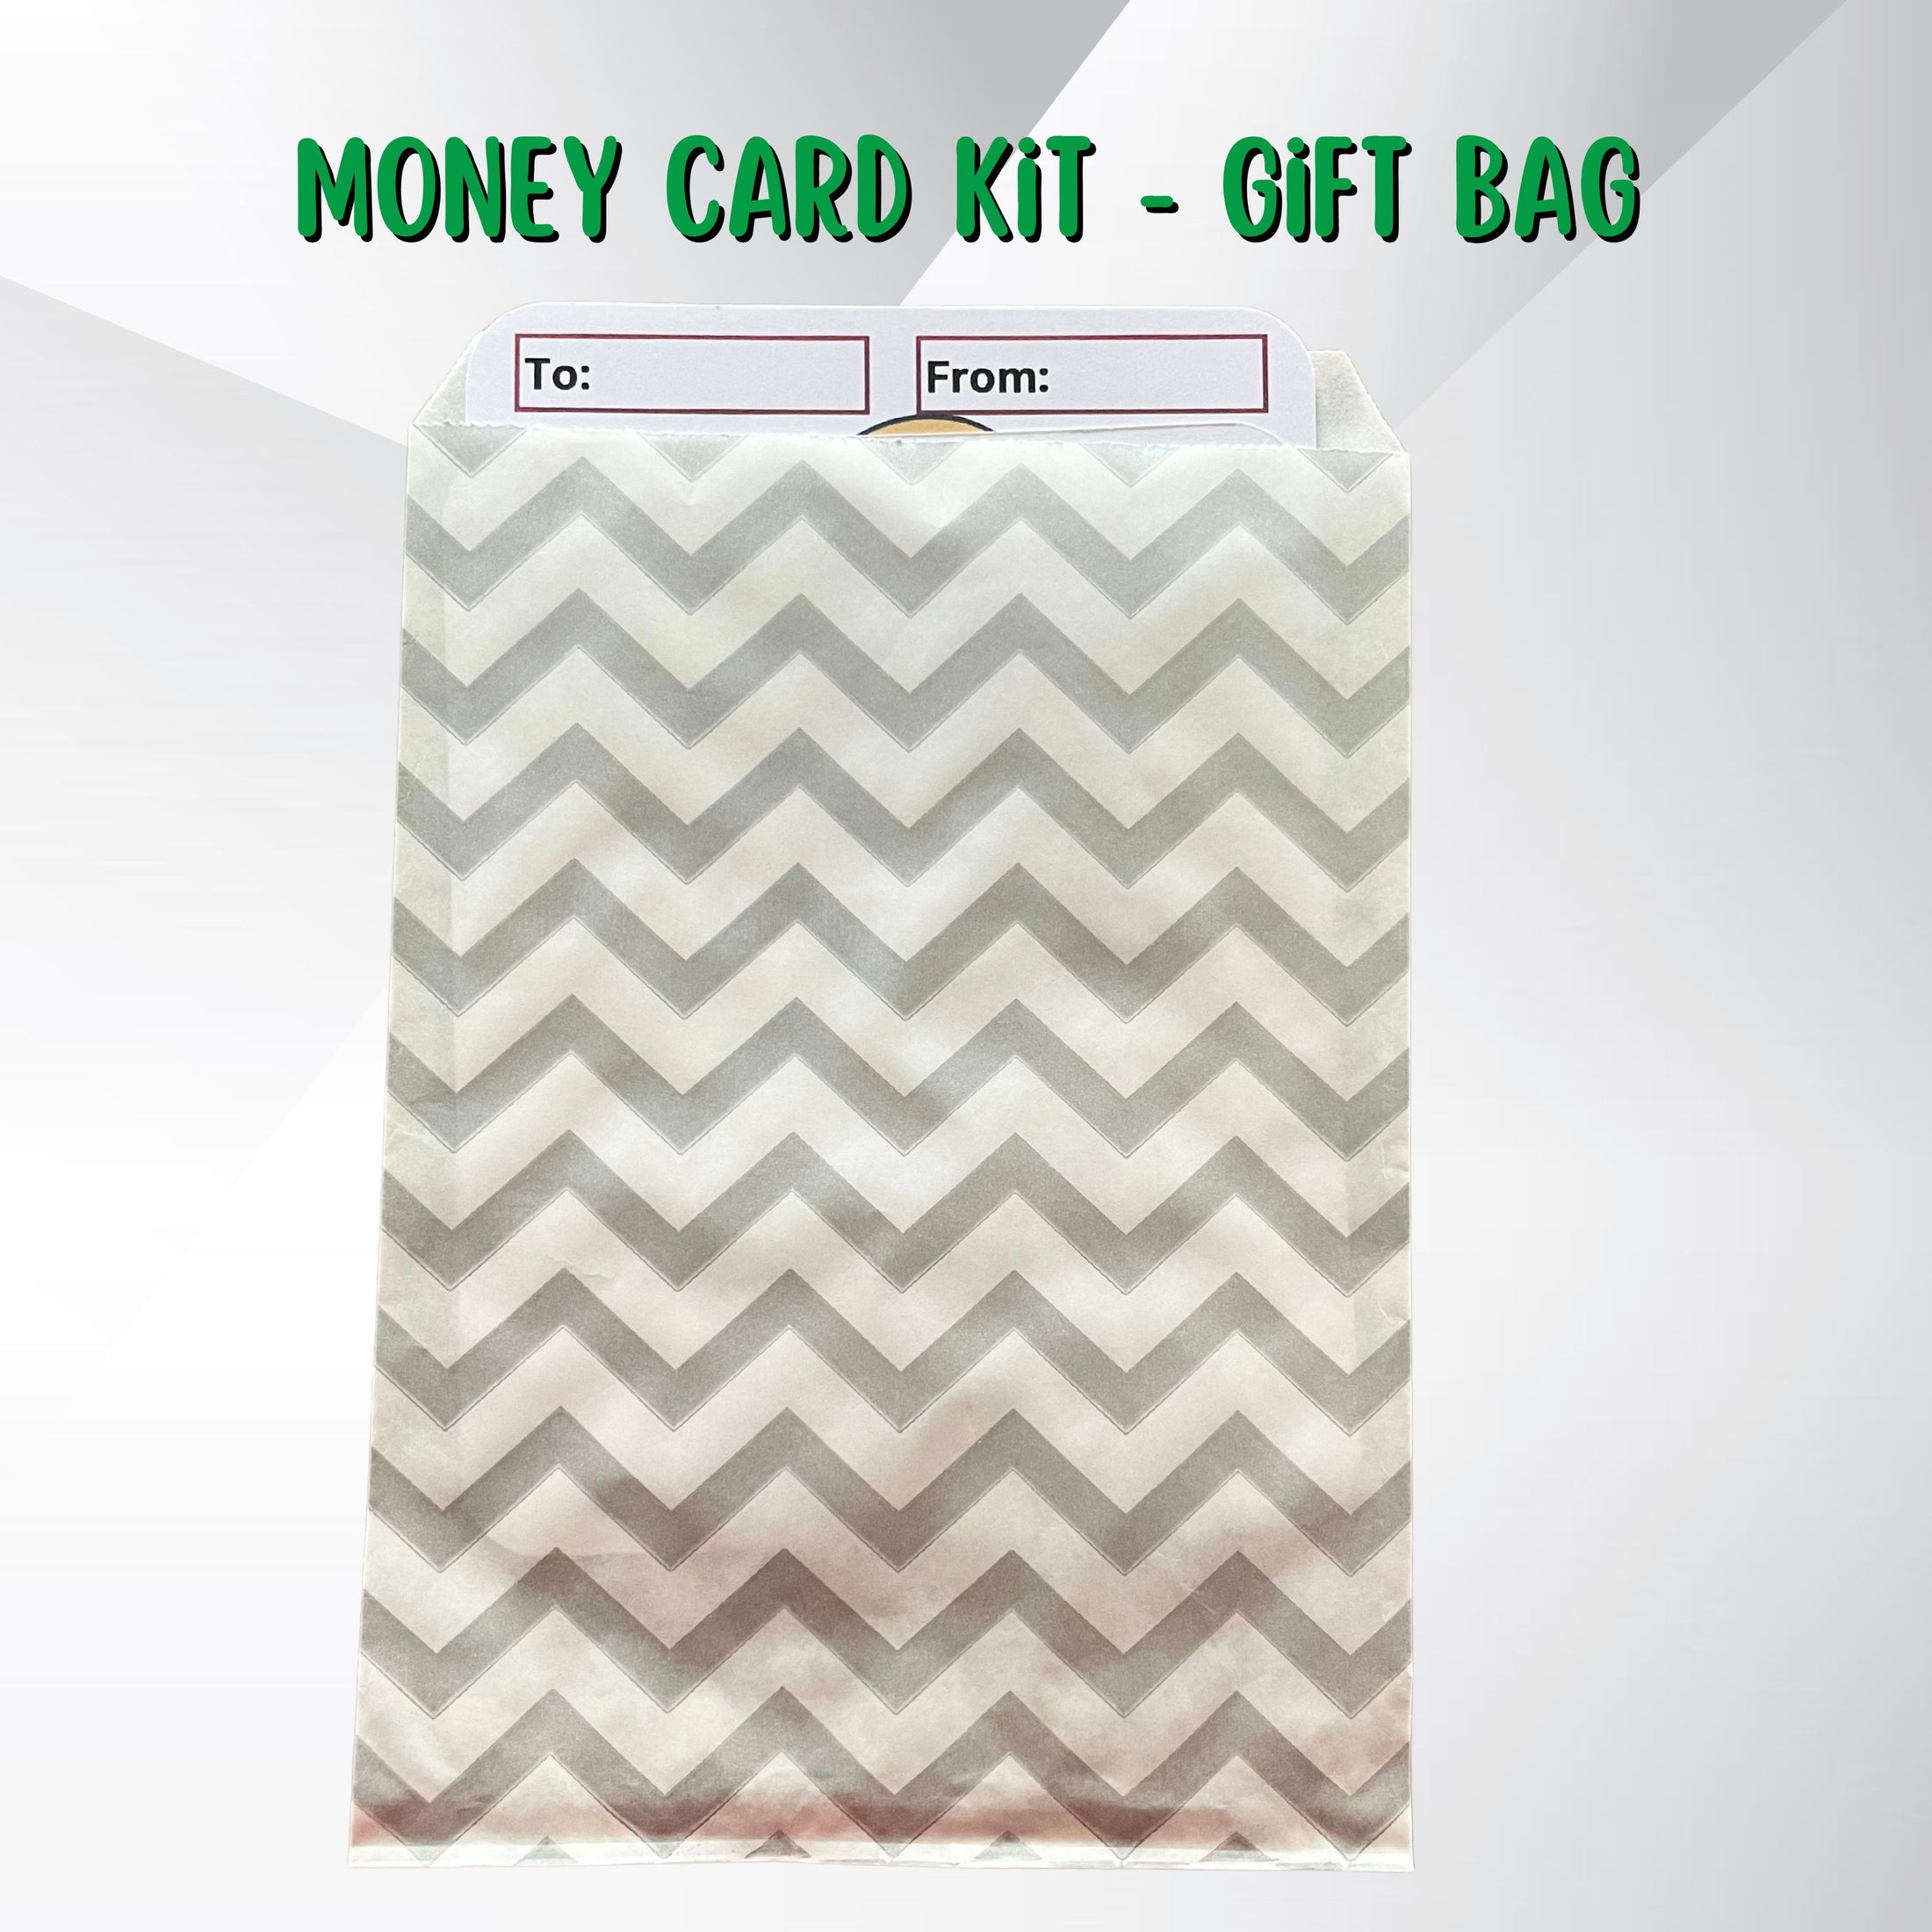 This image shows a money card inside a gift bag.